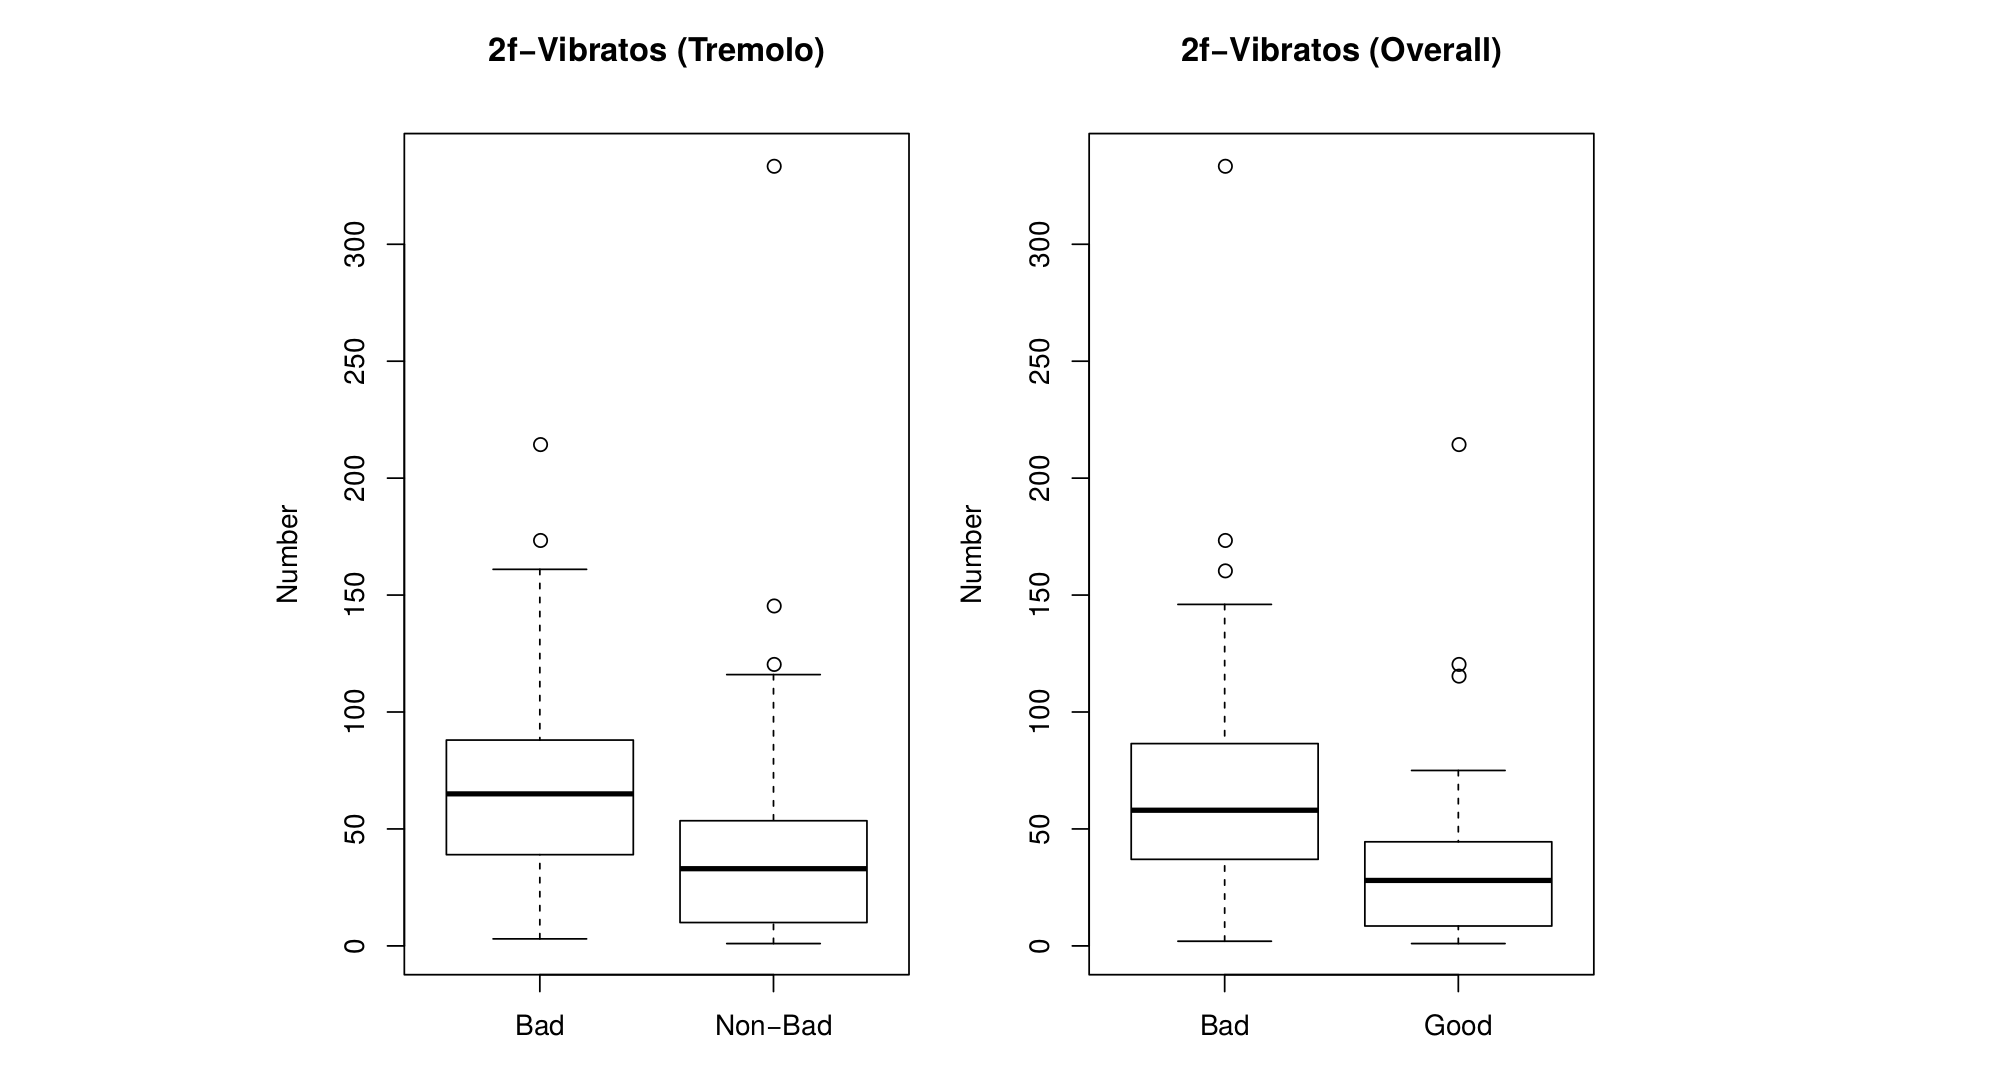 Number of 2f-vibratos and their evaluations in Tremolo and Overall groups. More description above and below.